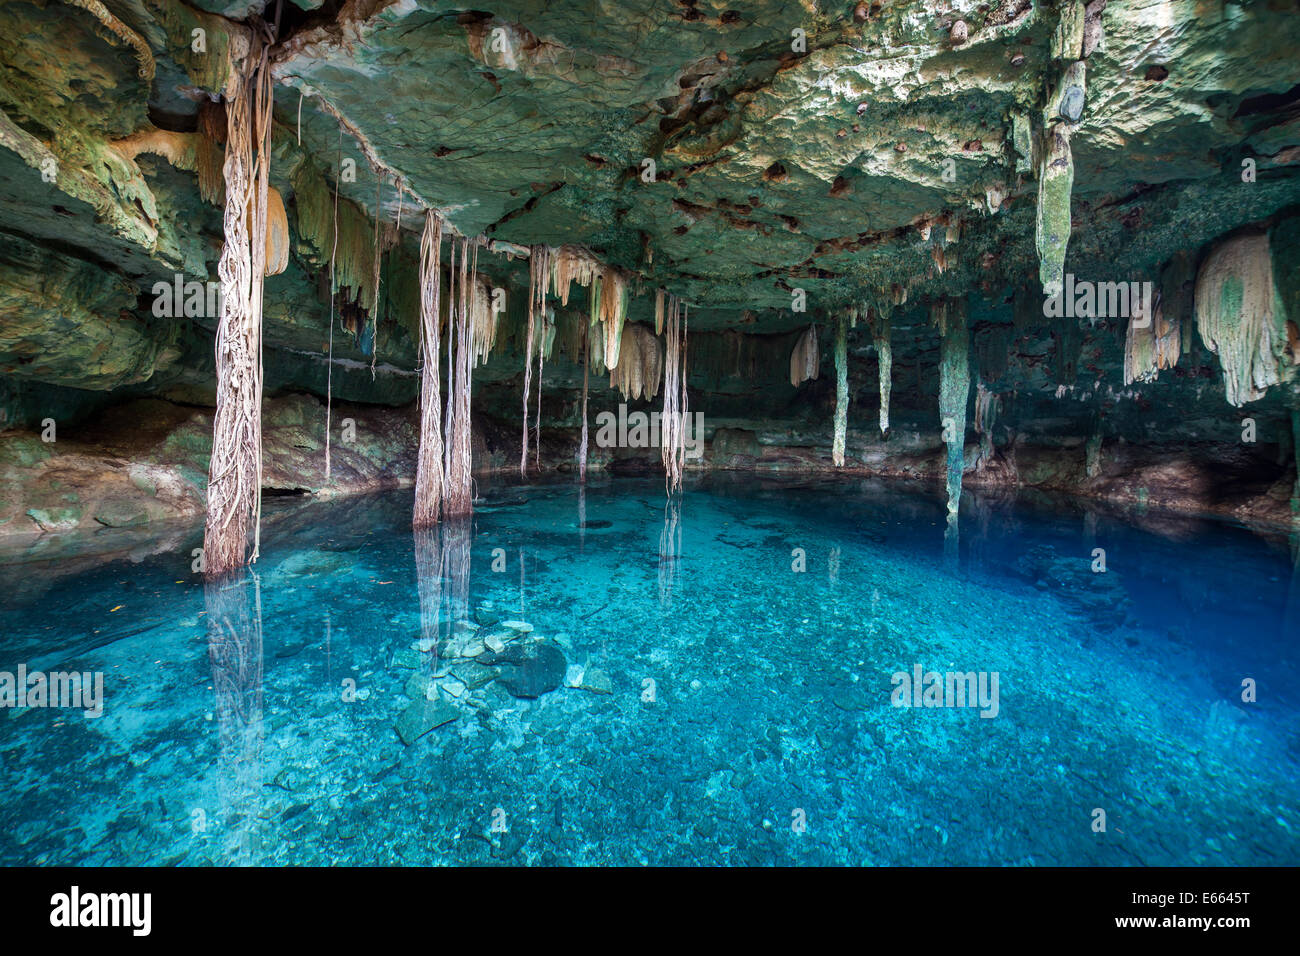 Entrance to the azure water of the Kankirixche cenote which continues underground for several hundred meters, Yucatan, Mexico. Stock Photo